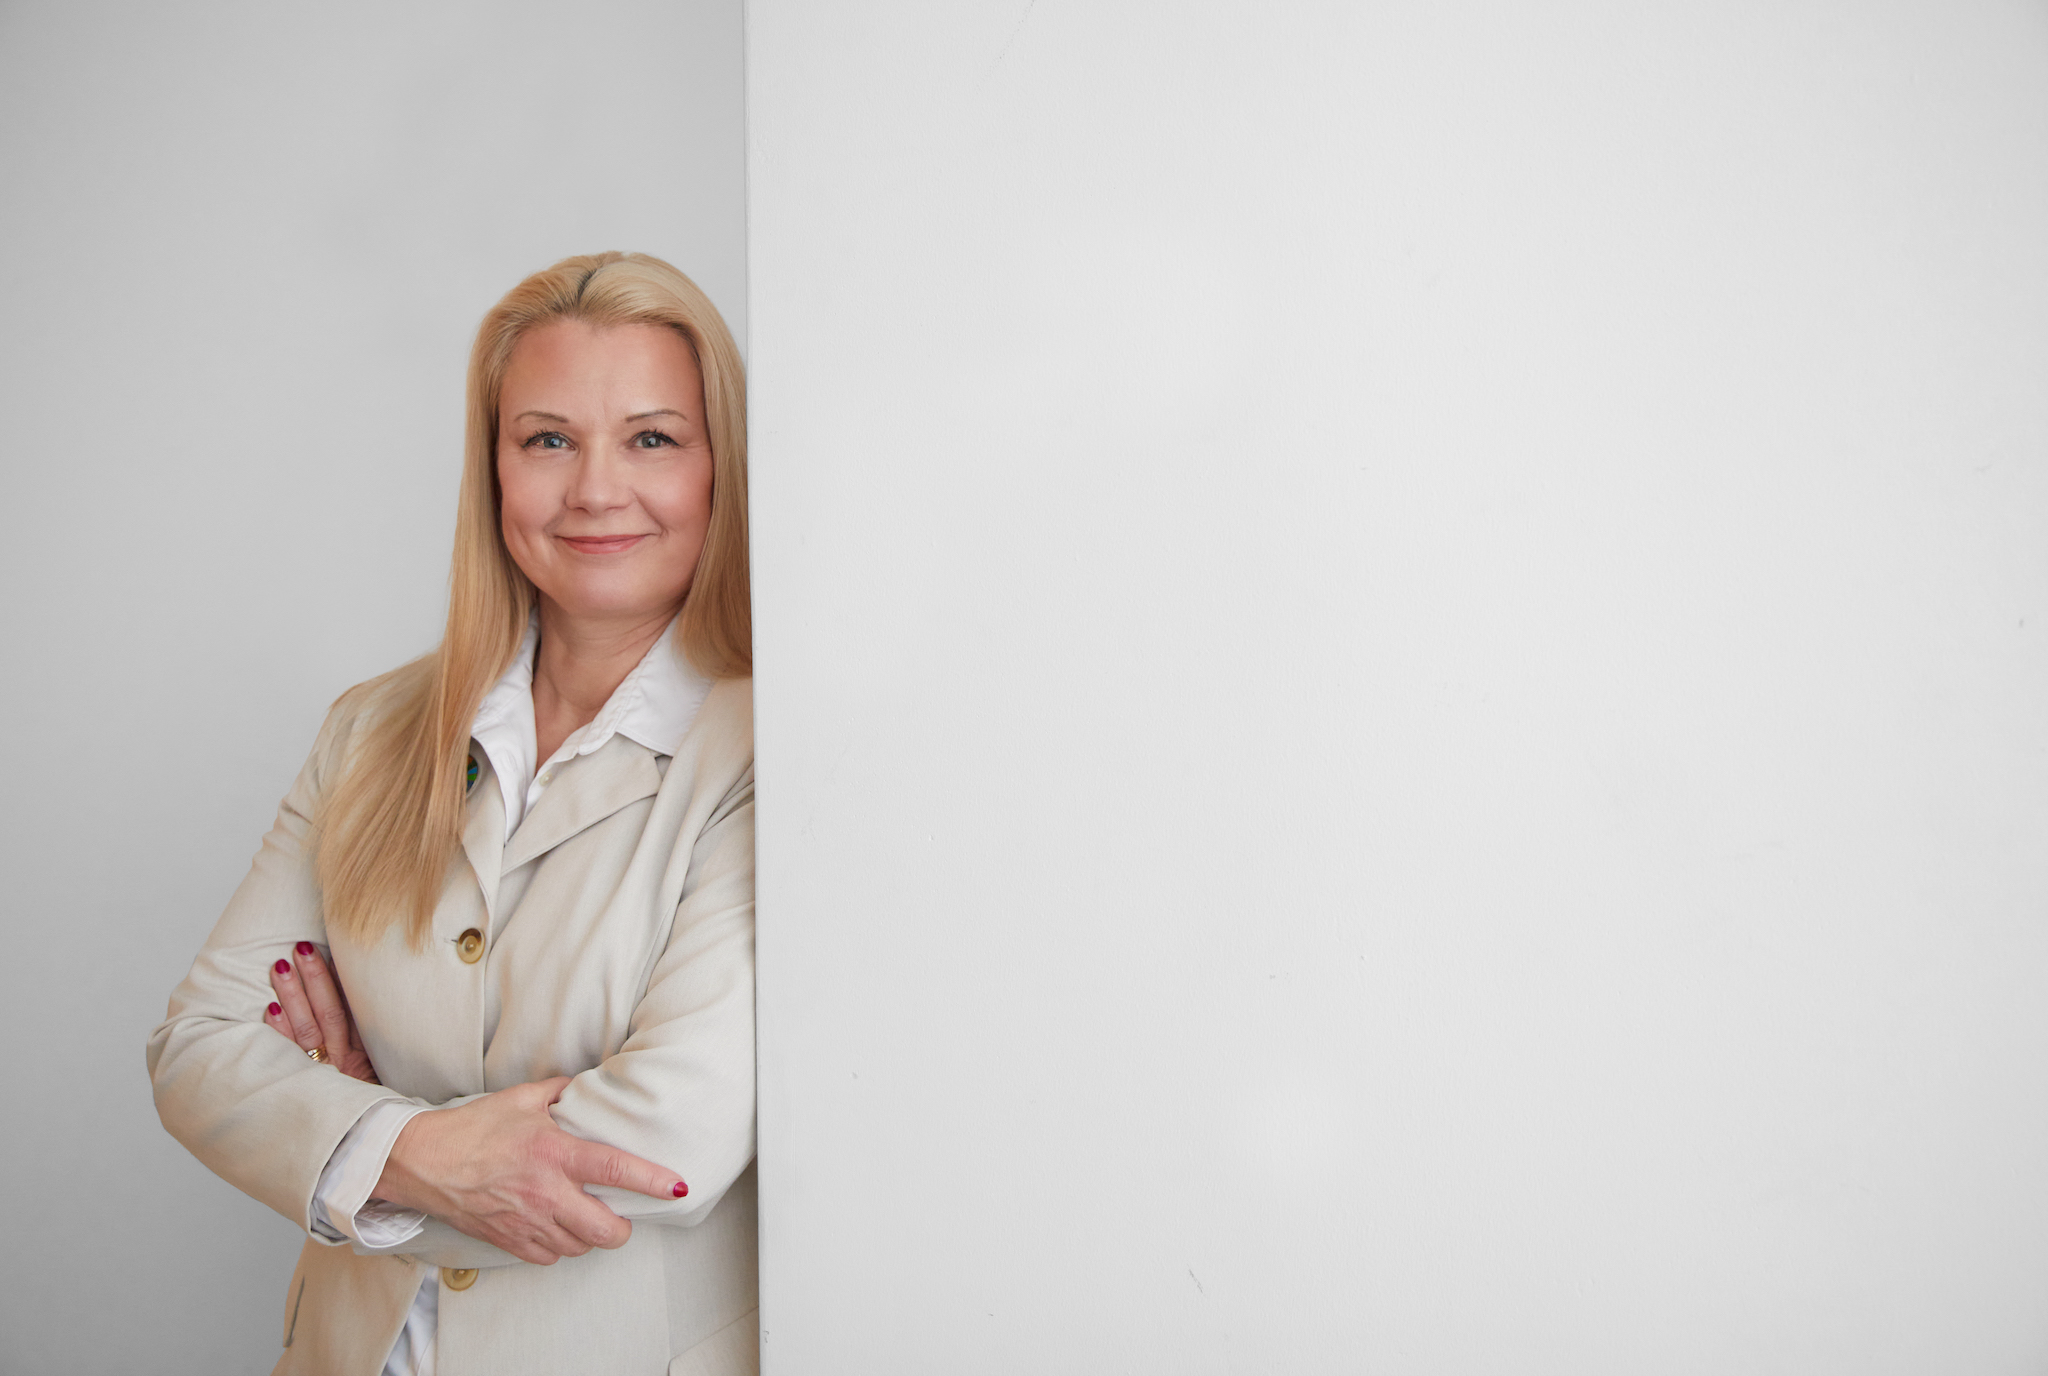 Marja Innanen has been appointed as the new Executive Director of the Finnish local network of the UN Global Compact.